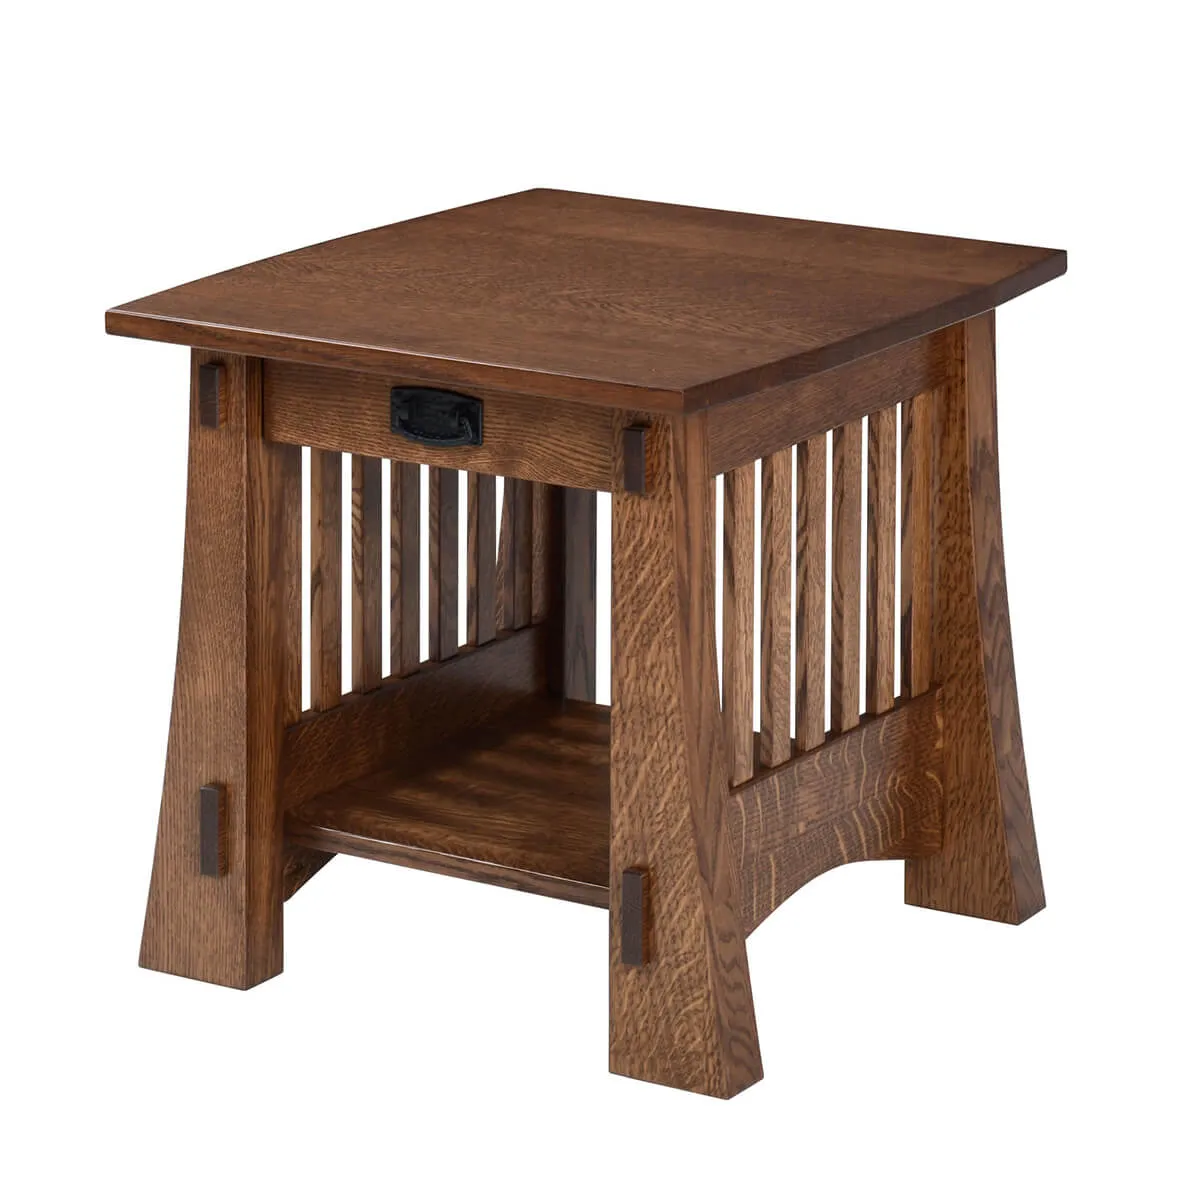 #88-11 Craftsman Mission Open End Table